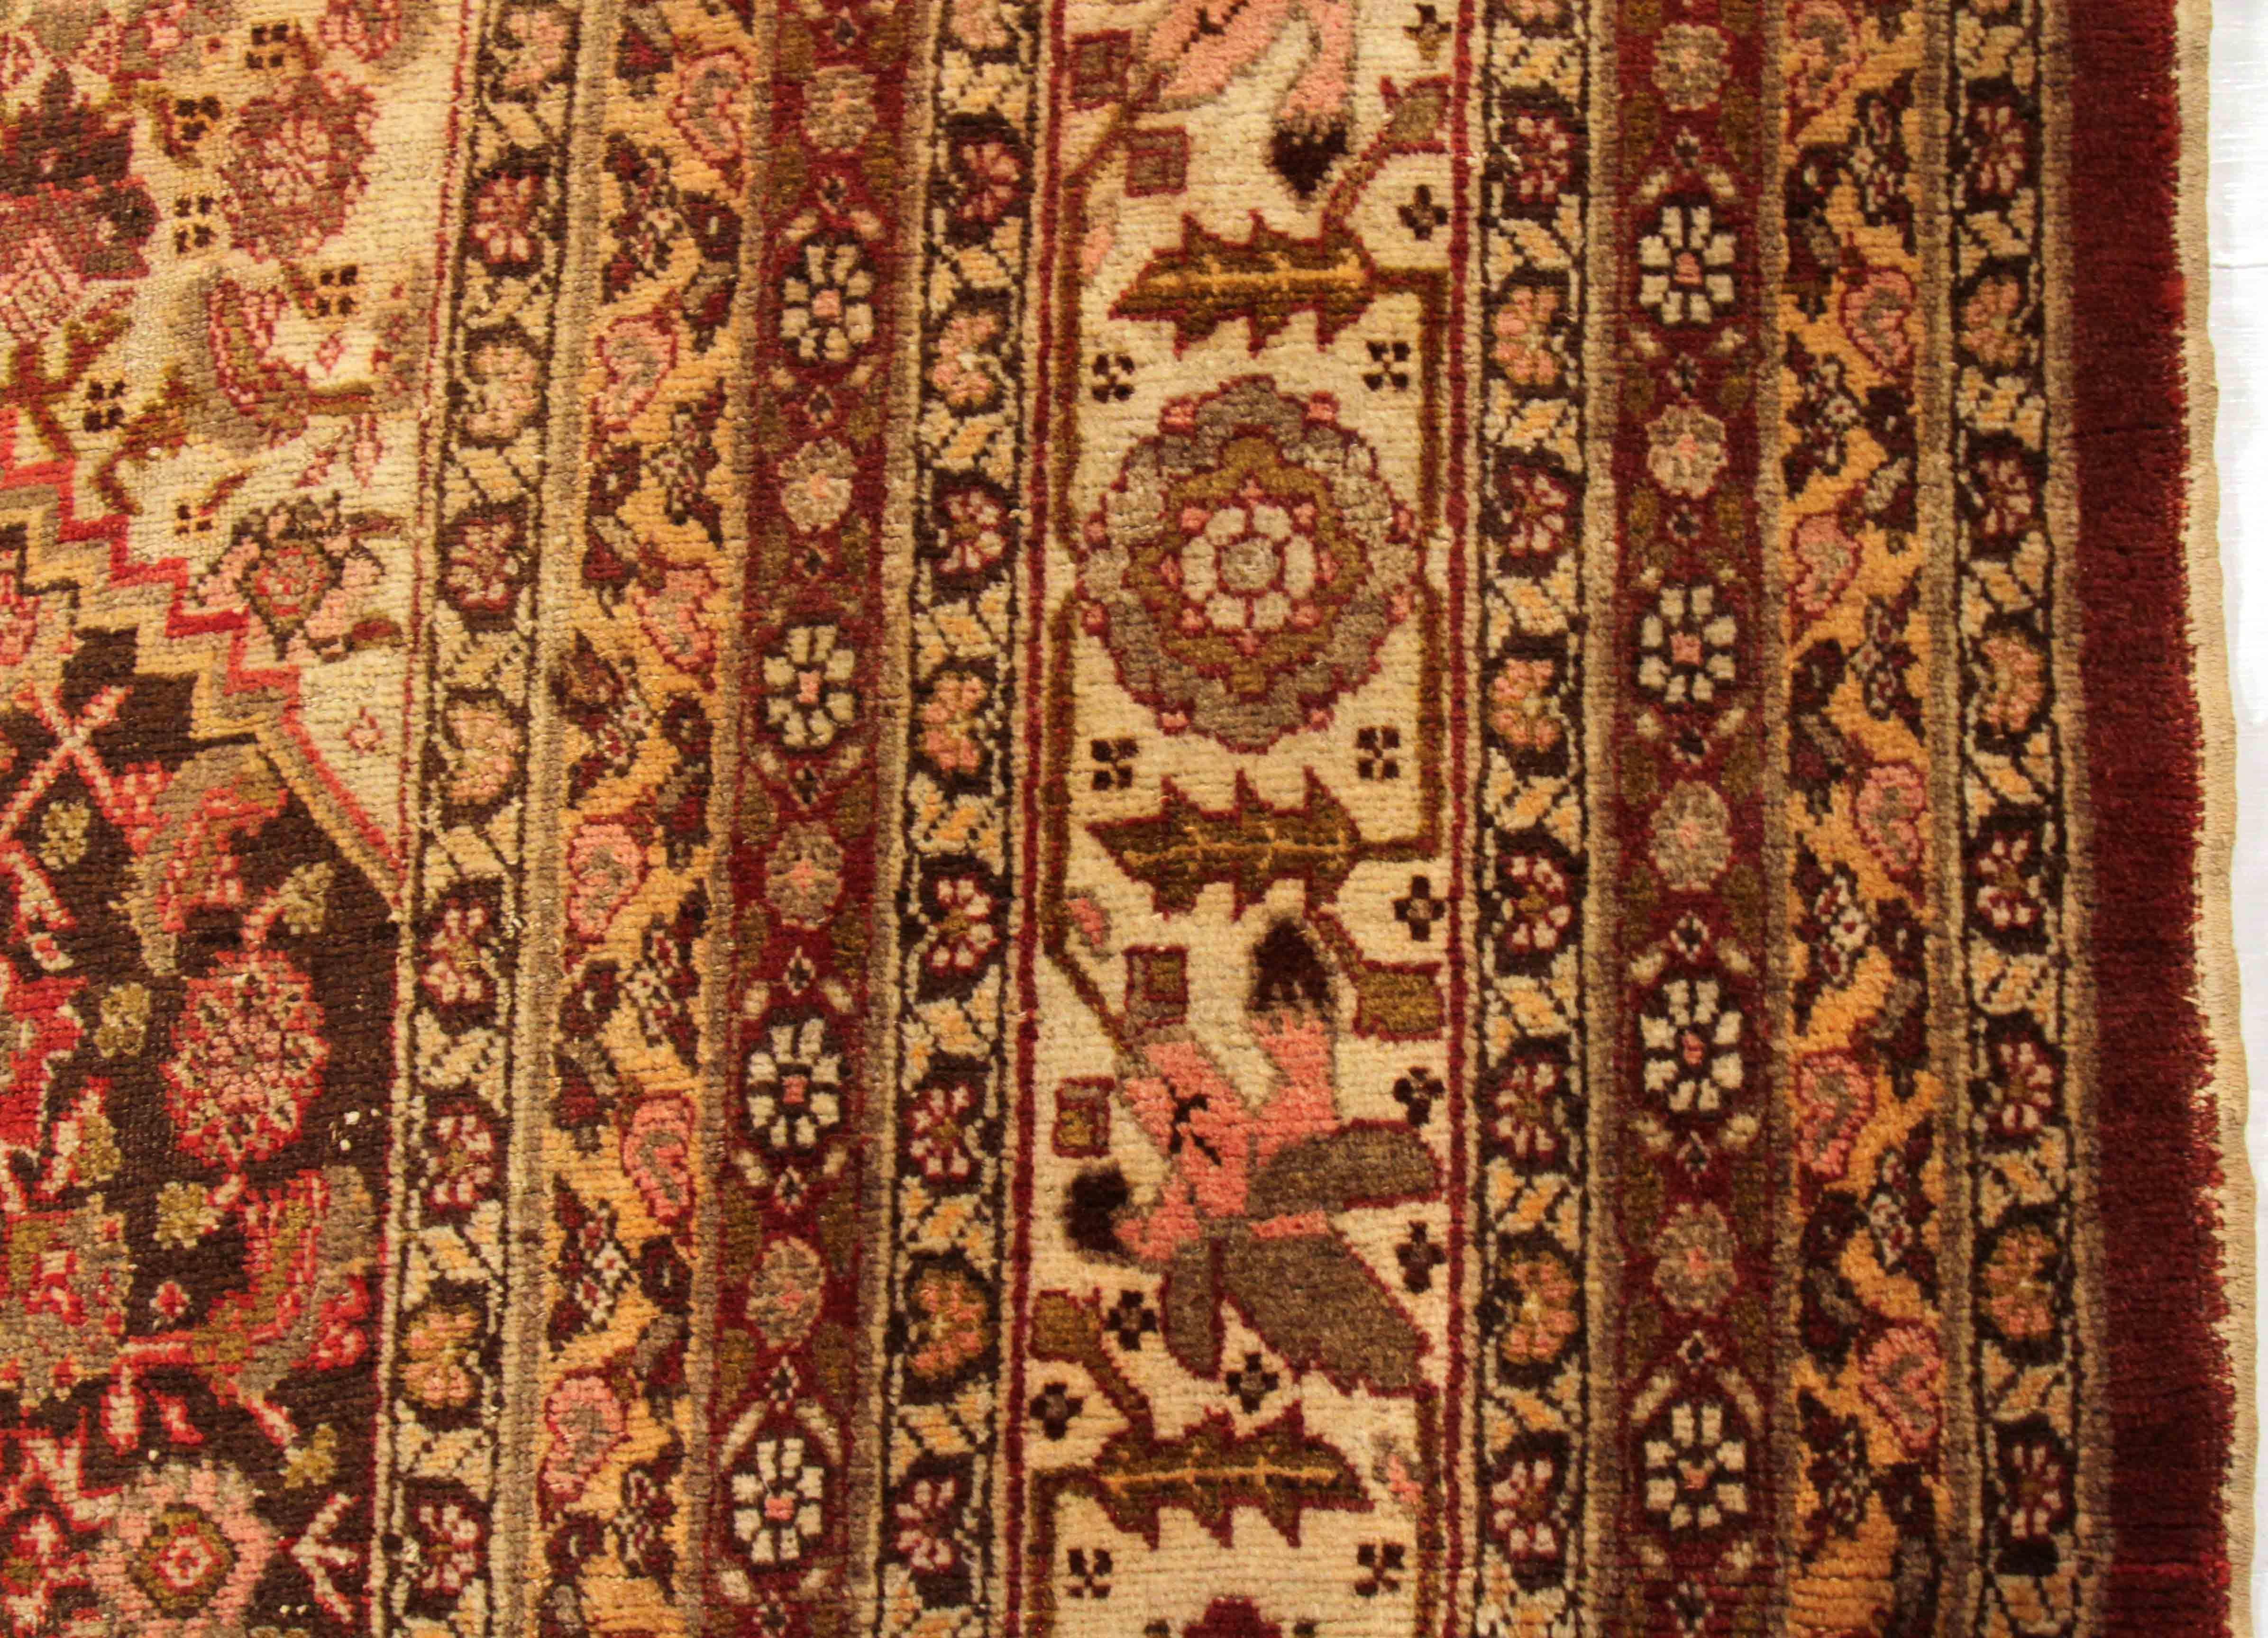 Antique Persian Tabriz Rug with Large Diamond and Floral Patterns, circa 1910s In Excellent Condition For Sale In Dallas, TX